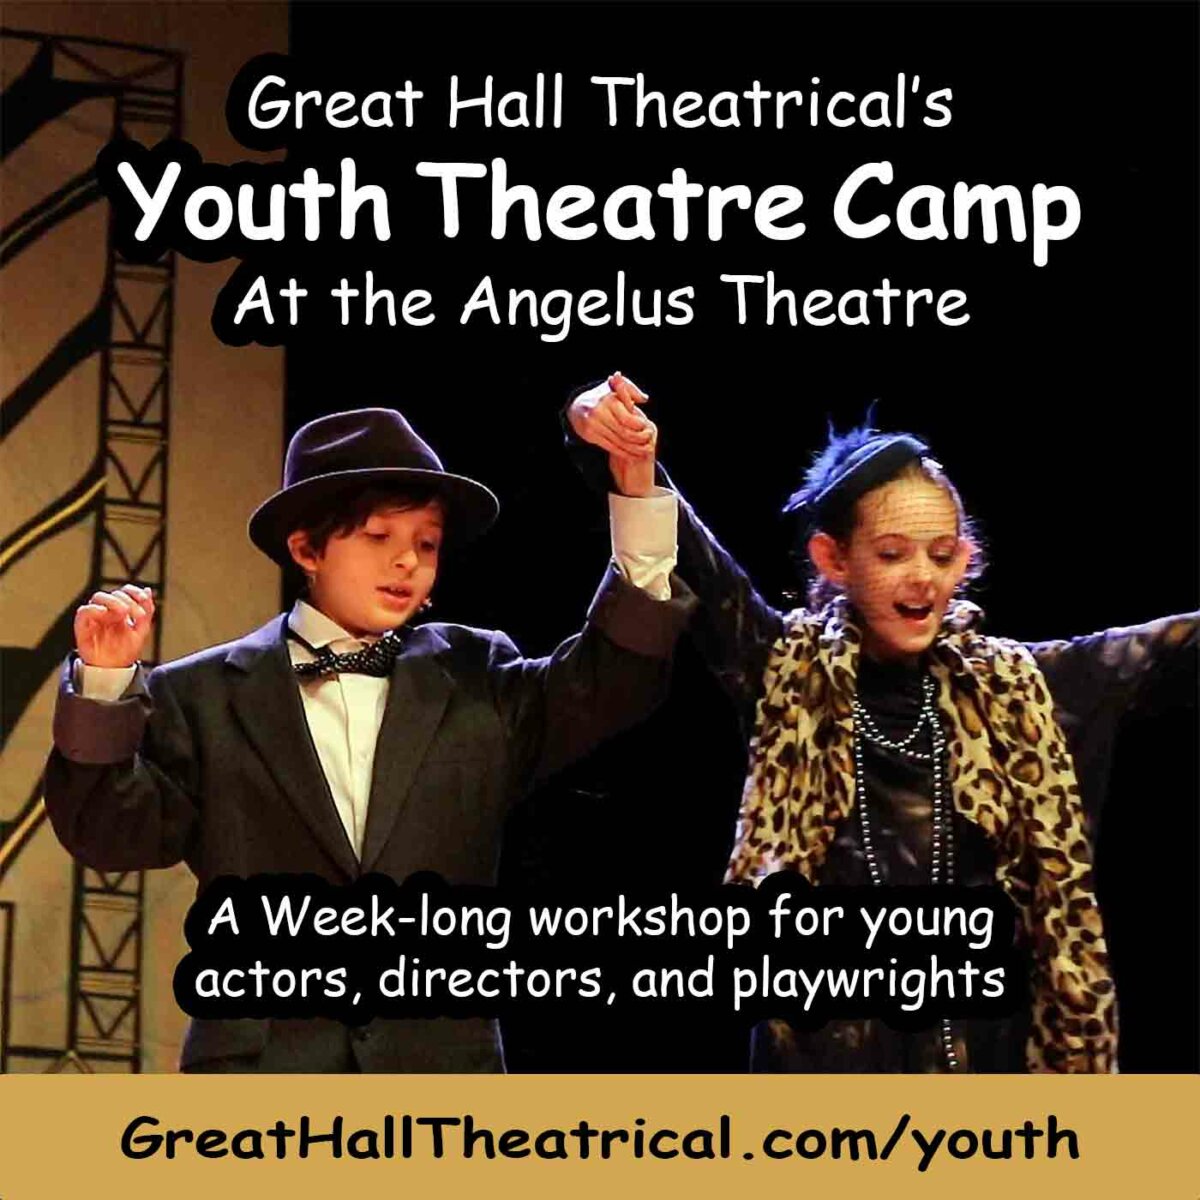 Great Hall Theatrical's Youth Theatre Workshop at the Angelus Theatre